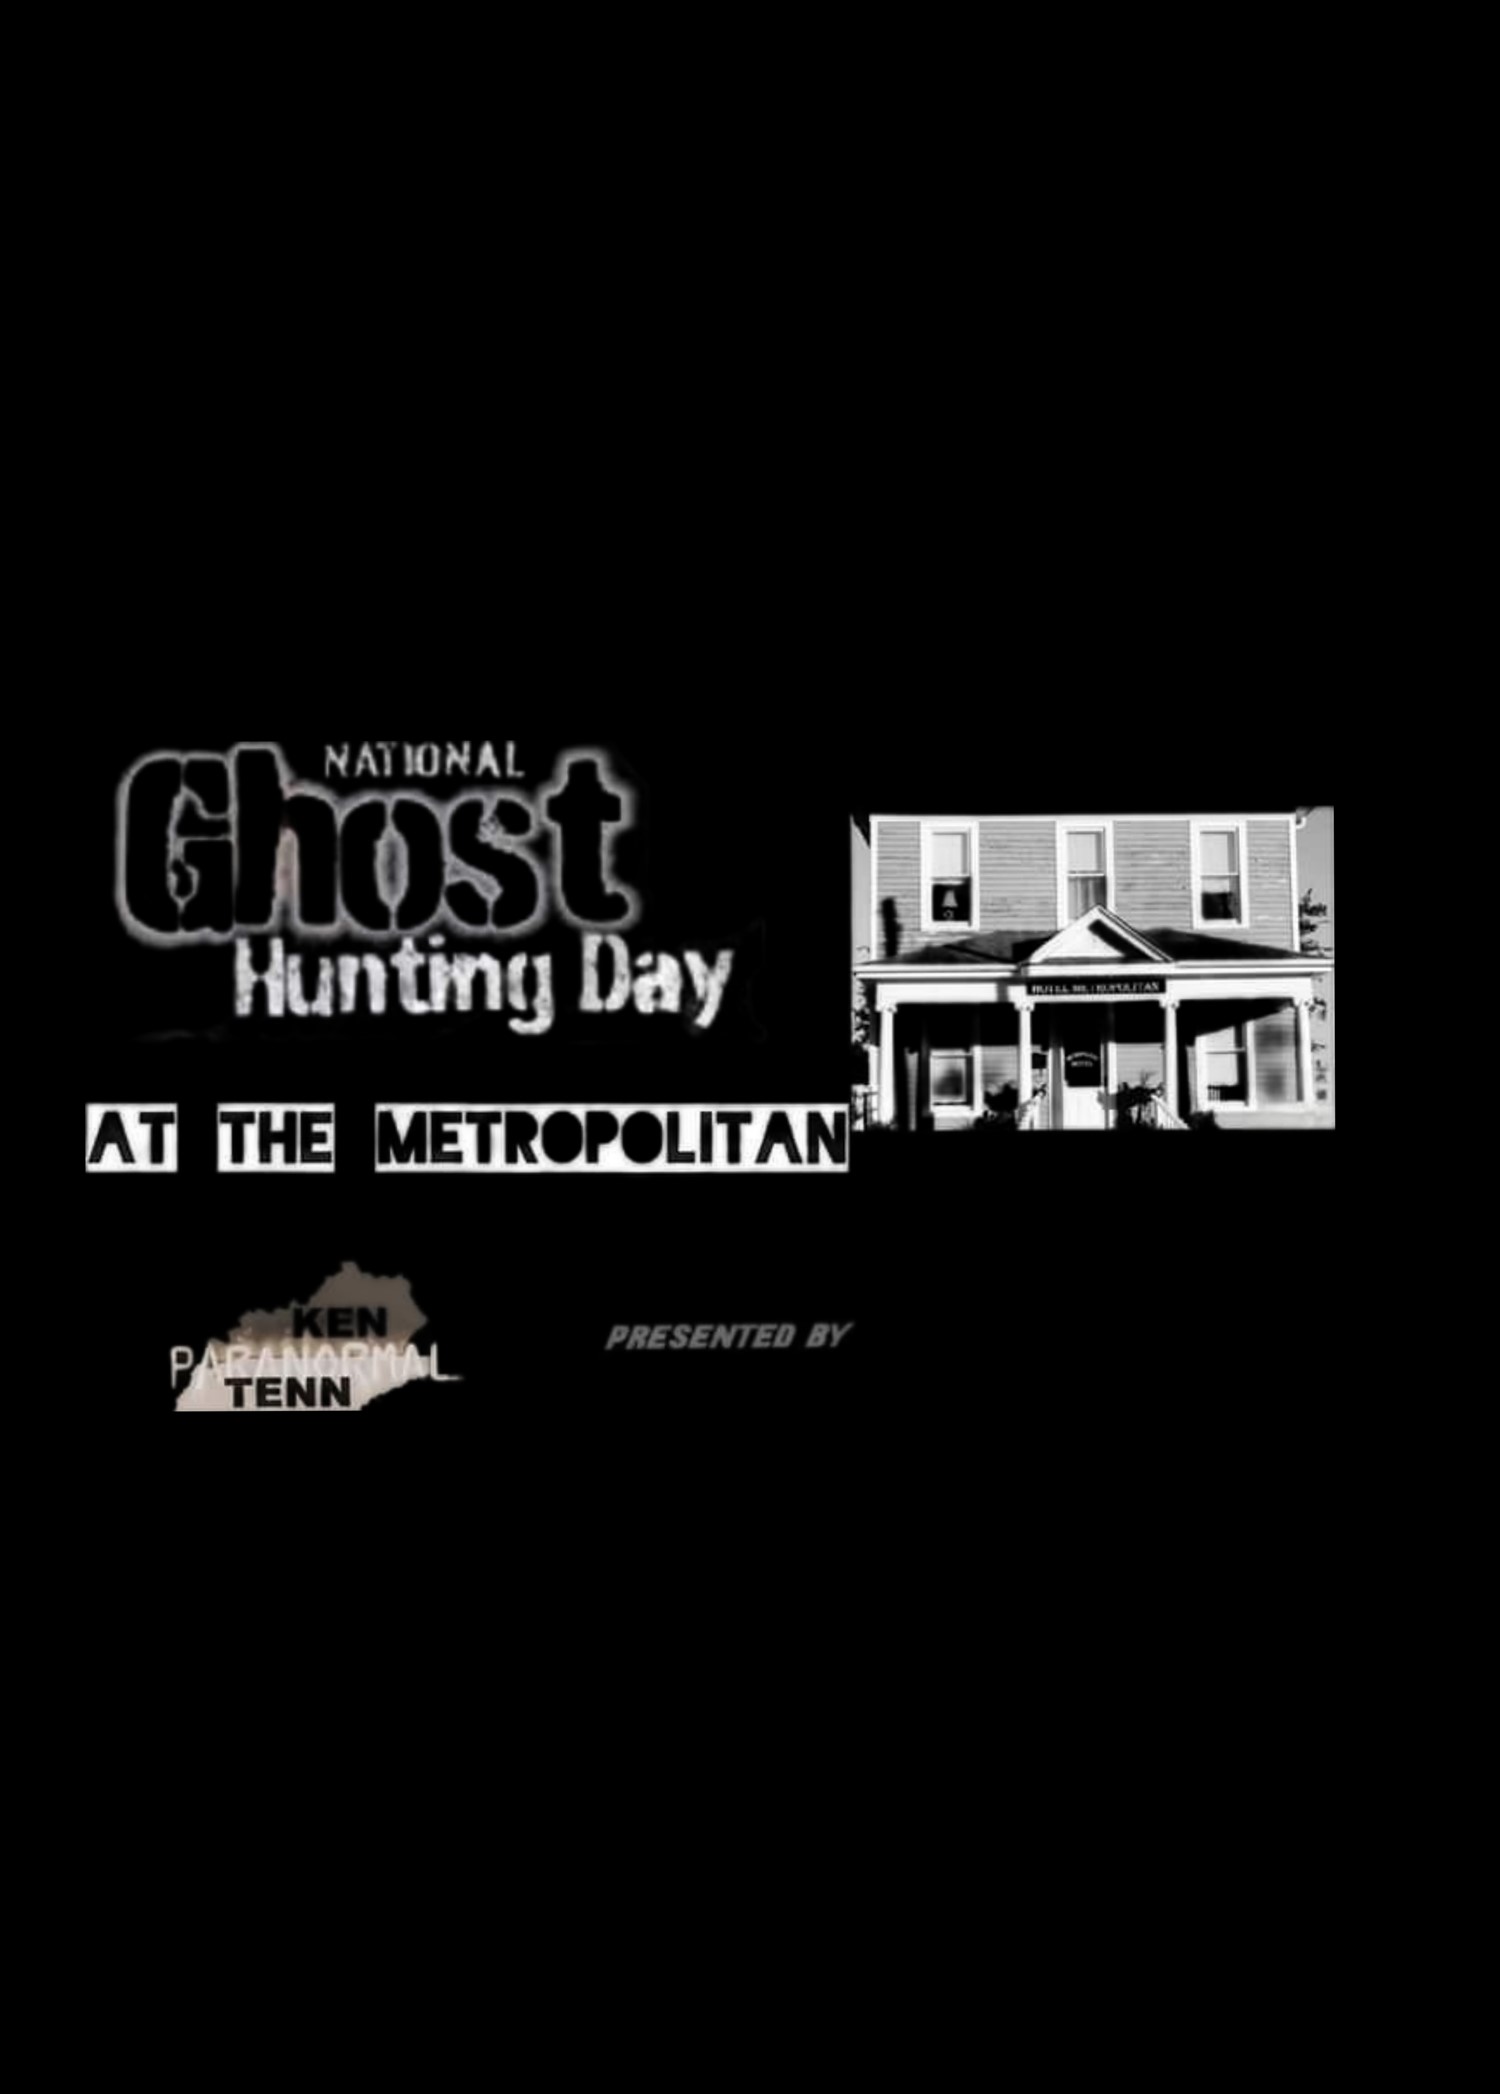 National Ghost Hunting Day at the Metropolitan  on Sep 28, 20:00@Hotel Metropolitan - Buy tickets and Get information on KenTenn Paranormal 